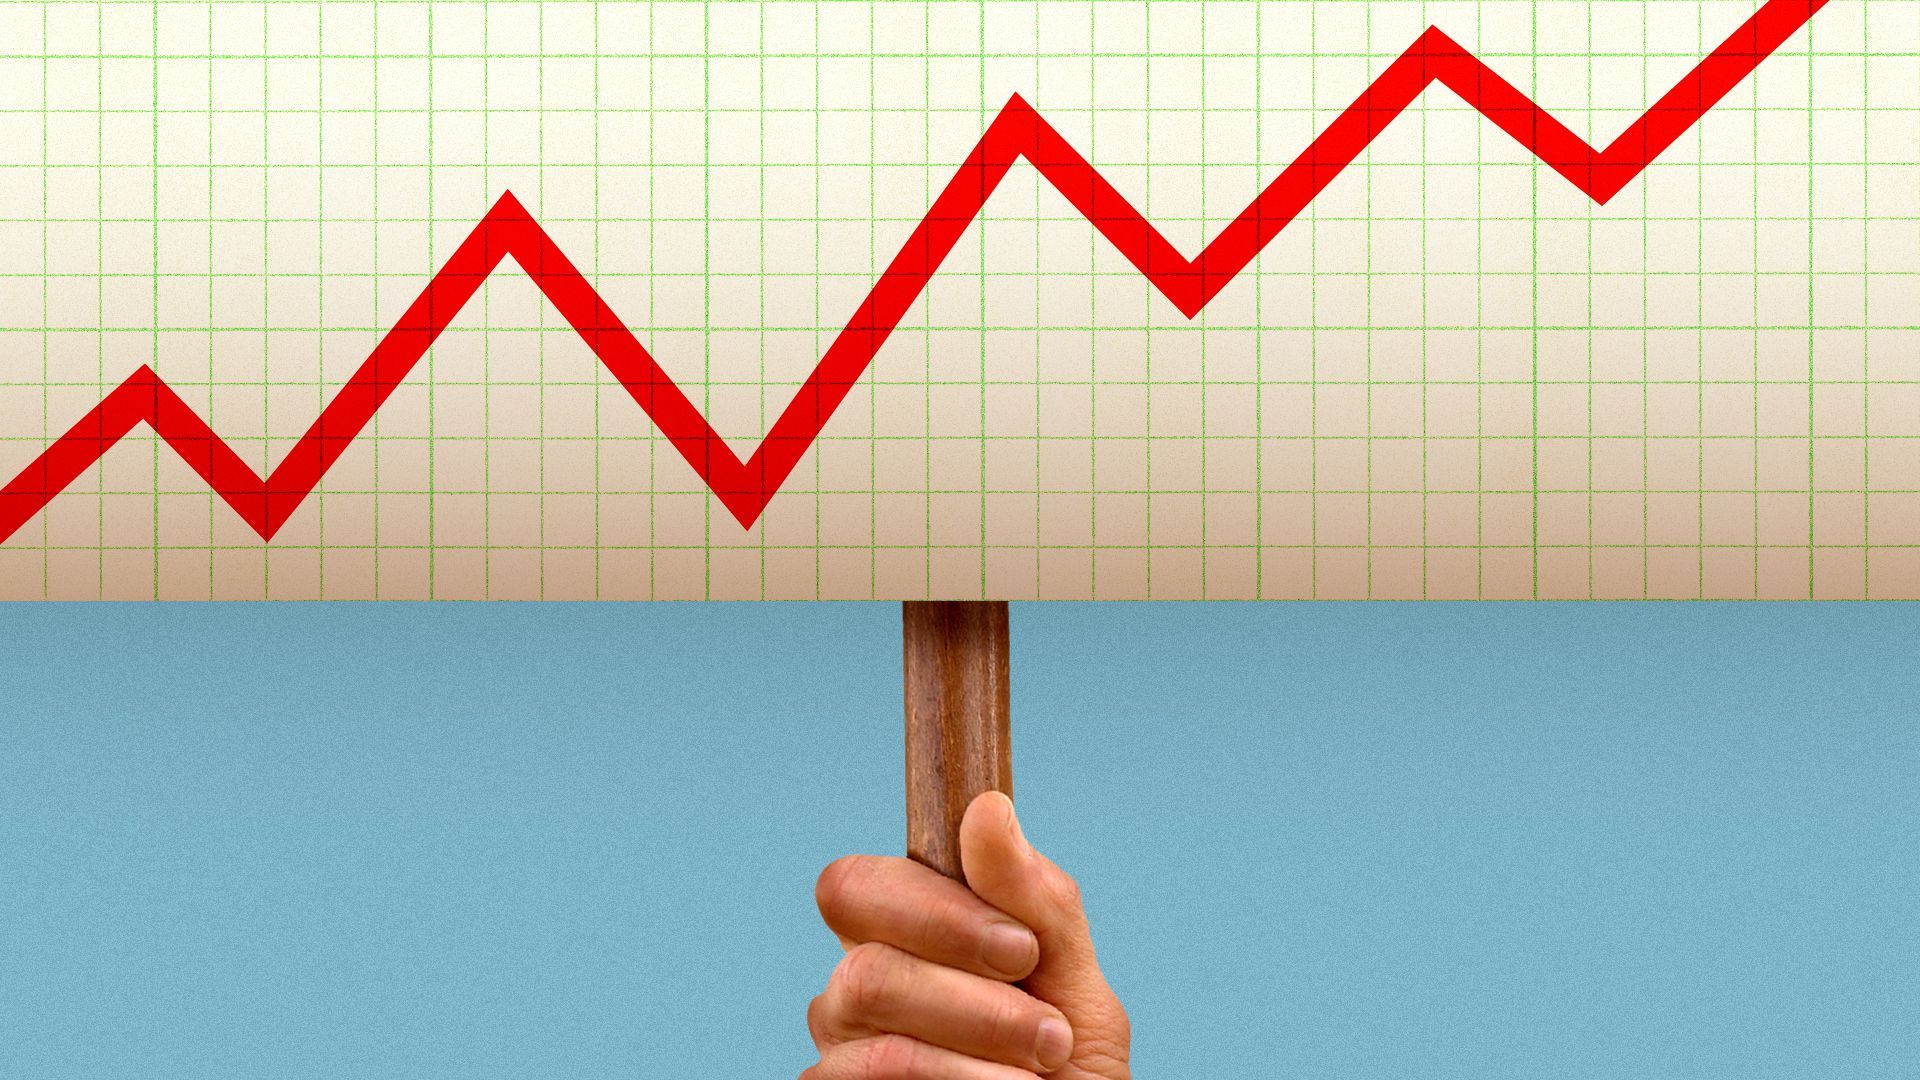 Illustration of a hand holding a picket sign with a positive line chart.